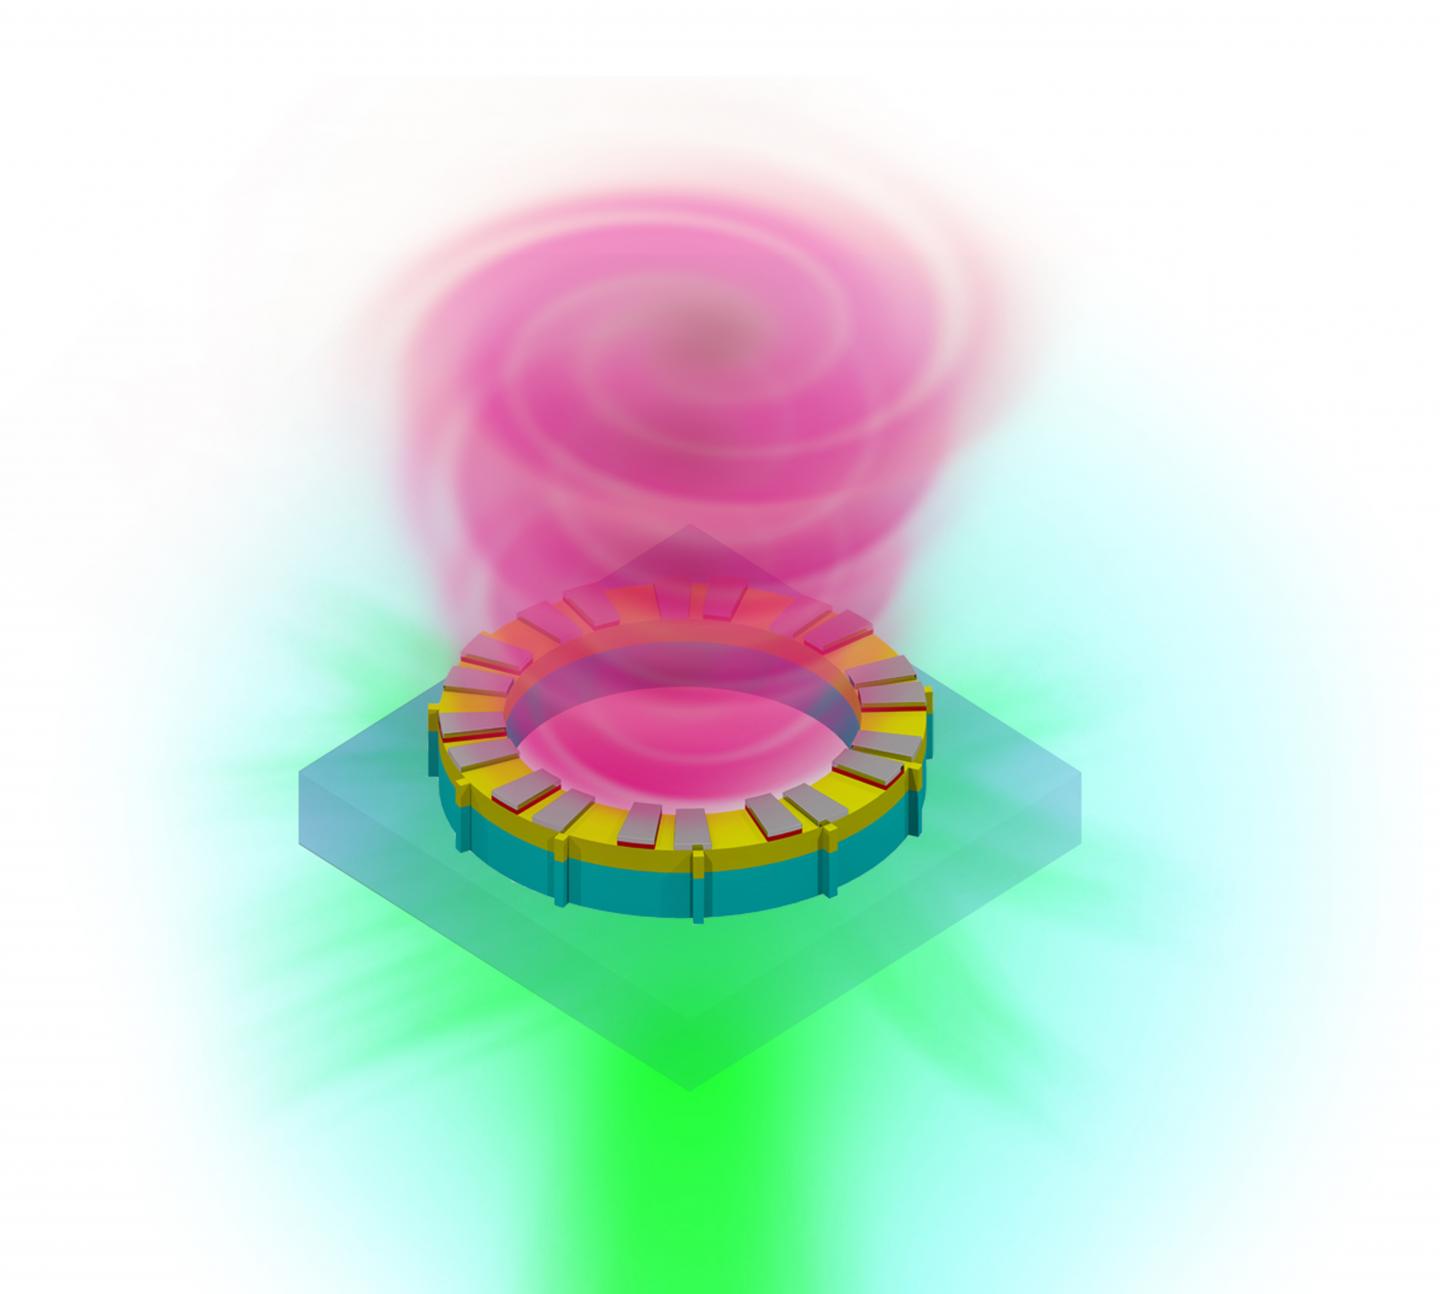 Twisted Optics: Seeing Light From a New Angle